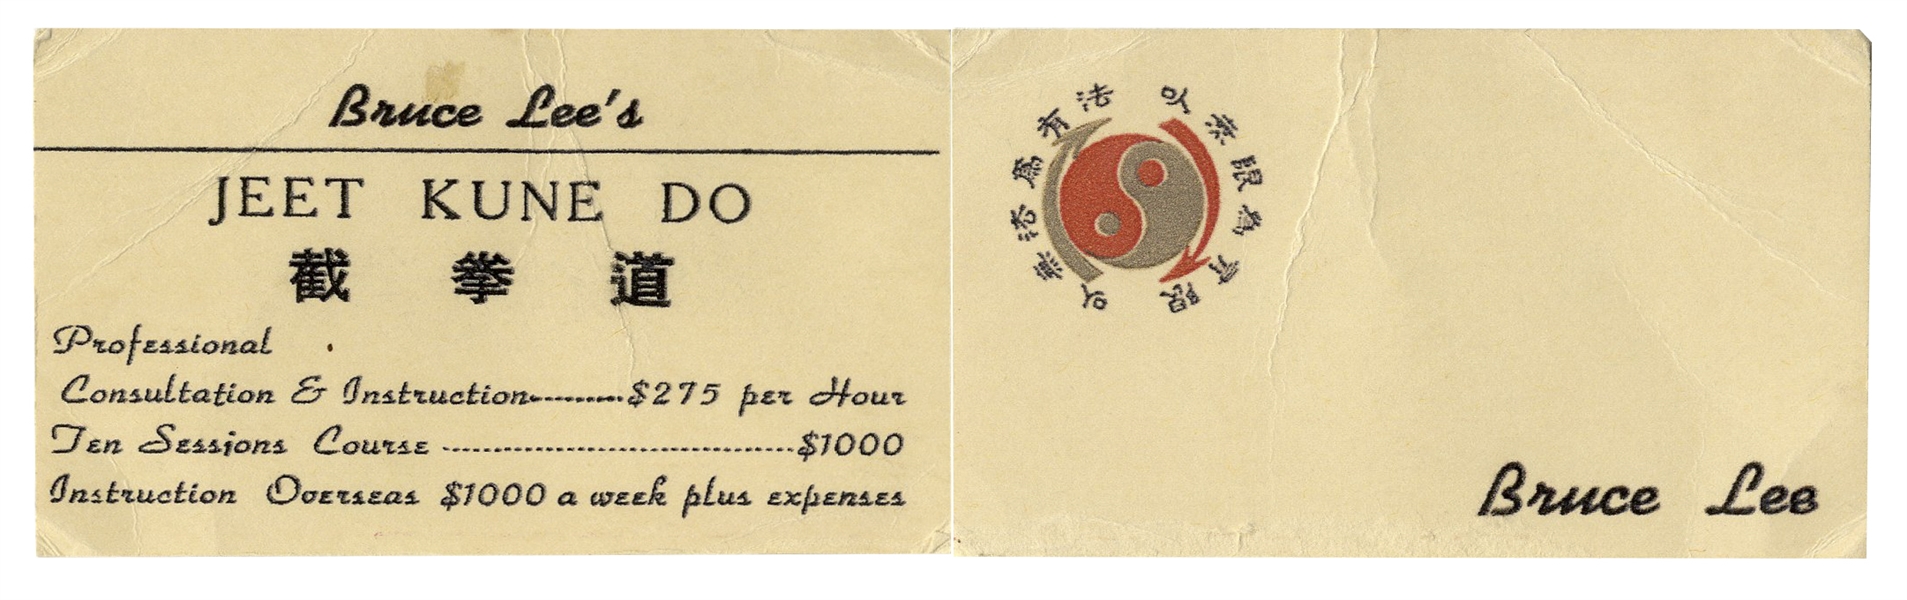 Bruce Lee's Business Card for His Jeet Kune Do Institute